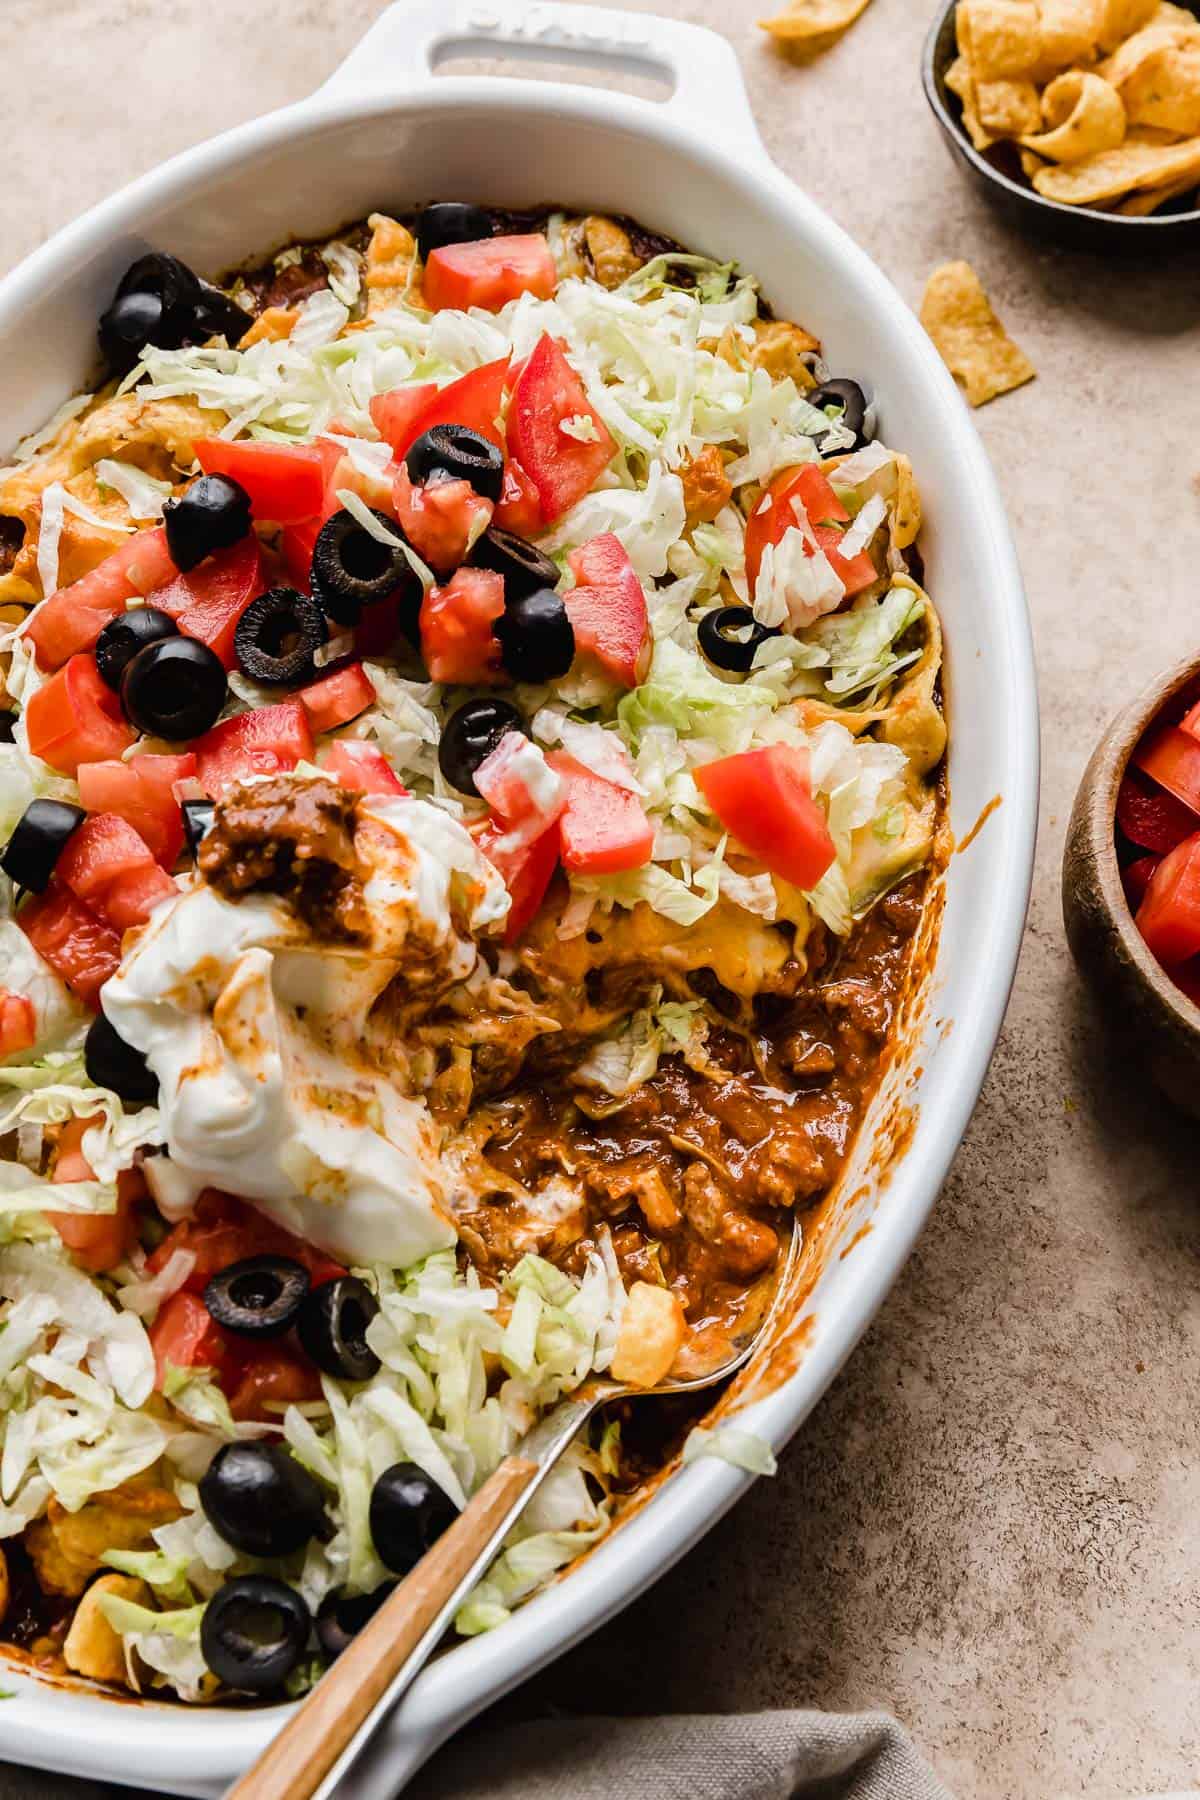 A close up photo of a spoon scooping out some Walking Taco Casserole from a white round baking dish.